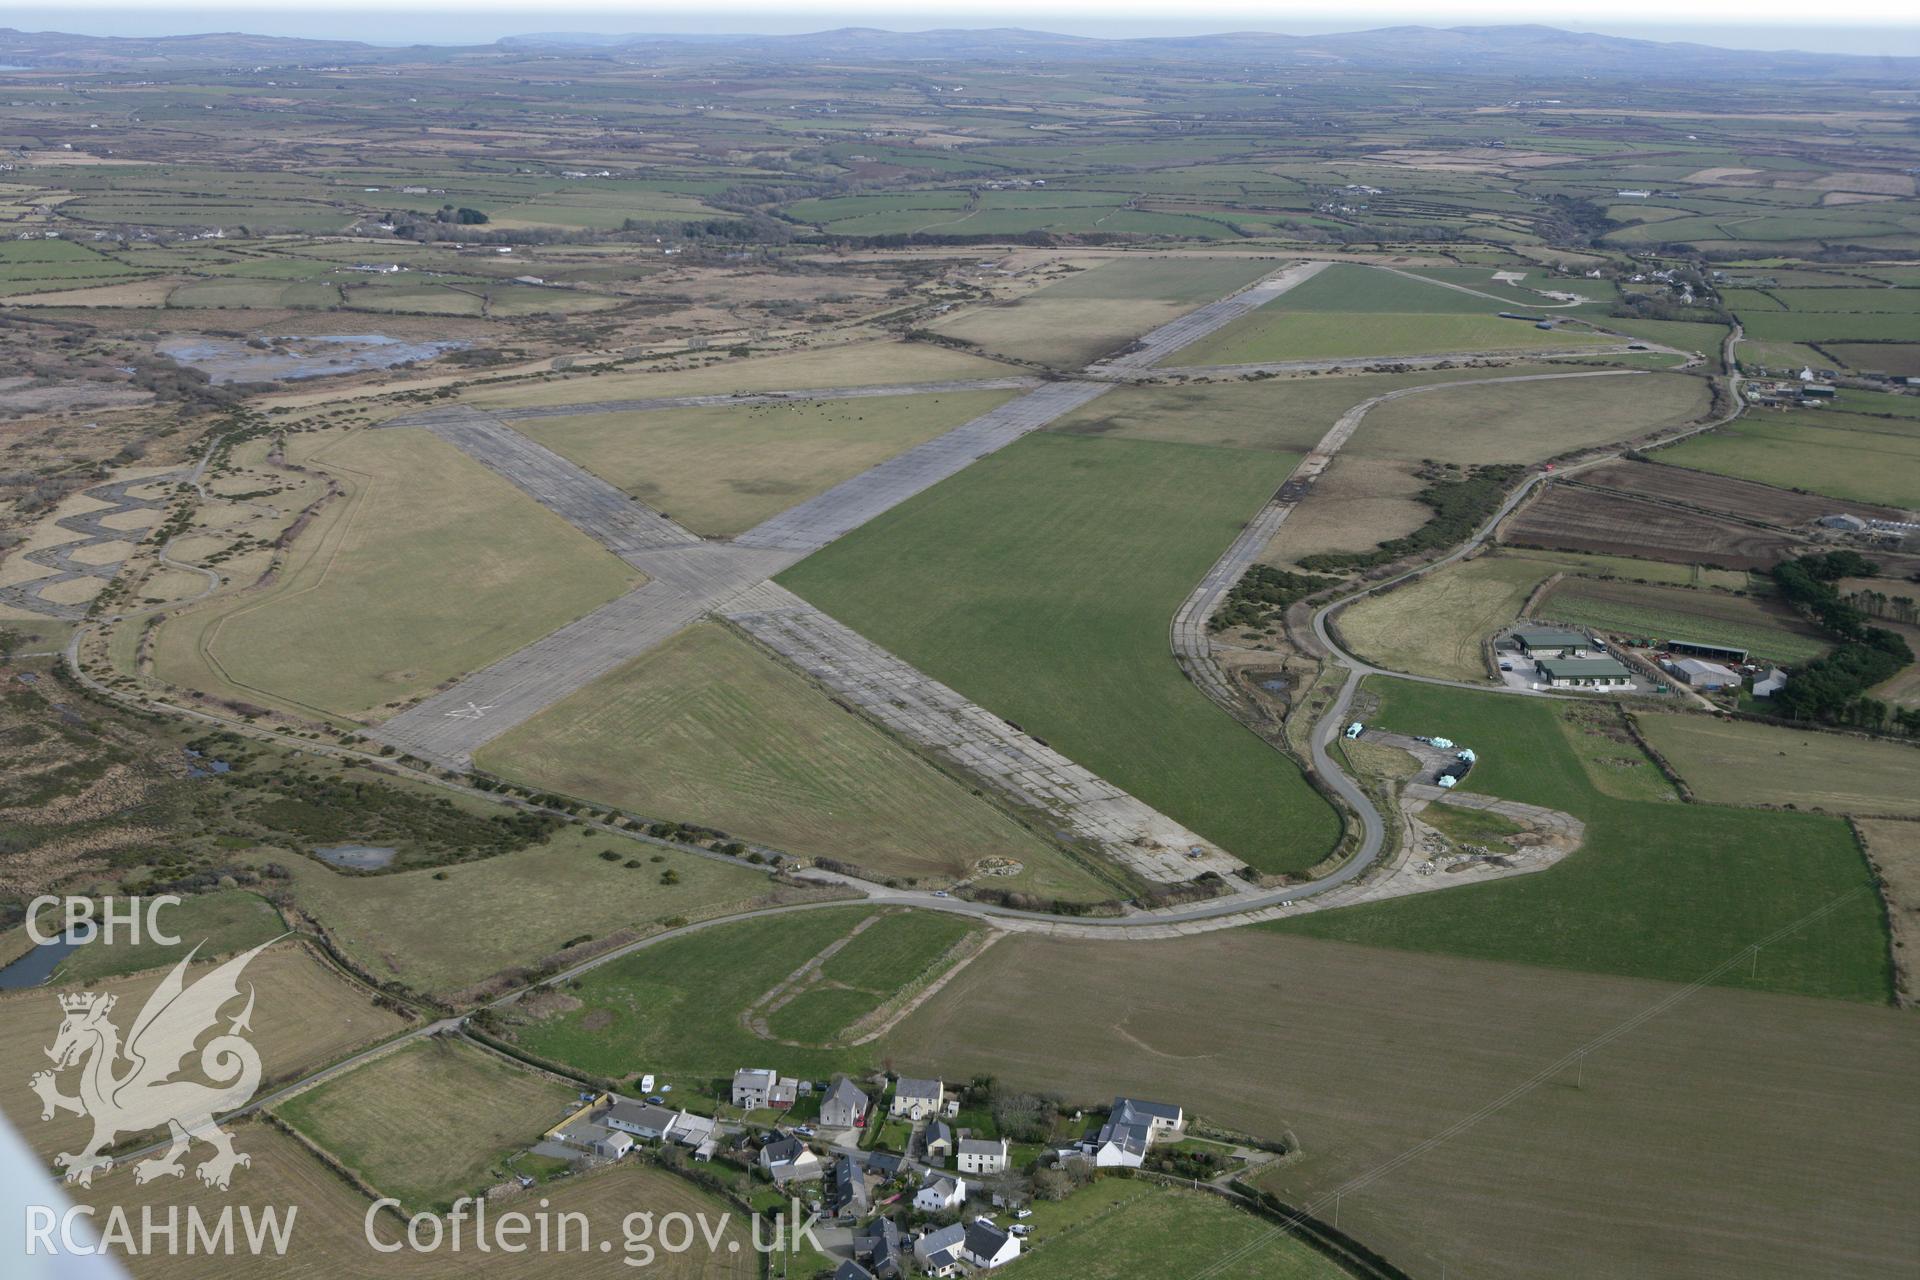 RCAHMW colour oblique aerial photograph of St. Davids Airfield, Whitchurch, Solva. Taken on 02 March 2010 by Toby Driver